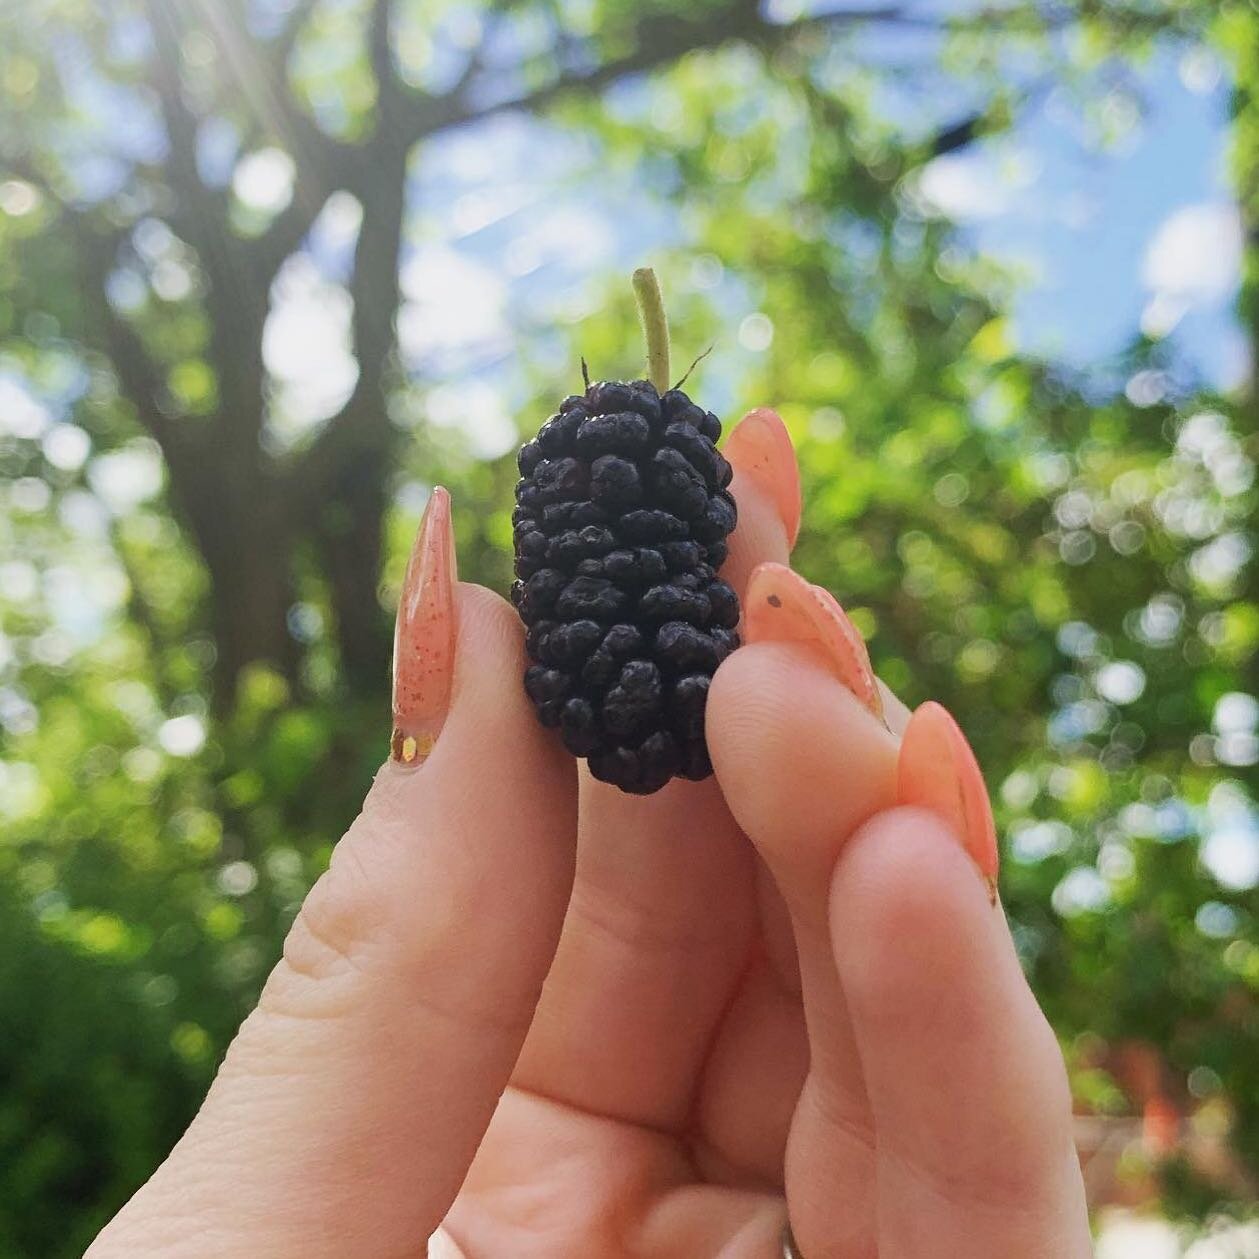 The mulberries in the front yard are ripening! Feel free to BYOB (bowl or small bucket, that is) and gather as many berries as you want&mdash;or learn to identify ripening mulberry trees along your neighborhood walking route. .
.
.
I made mulberry ja